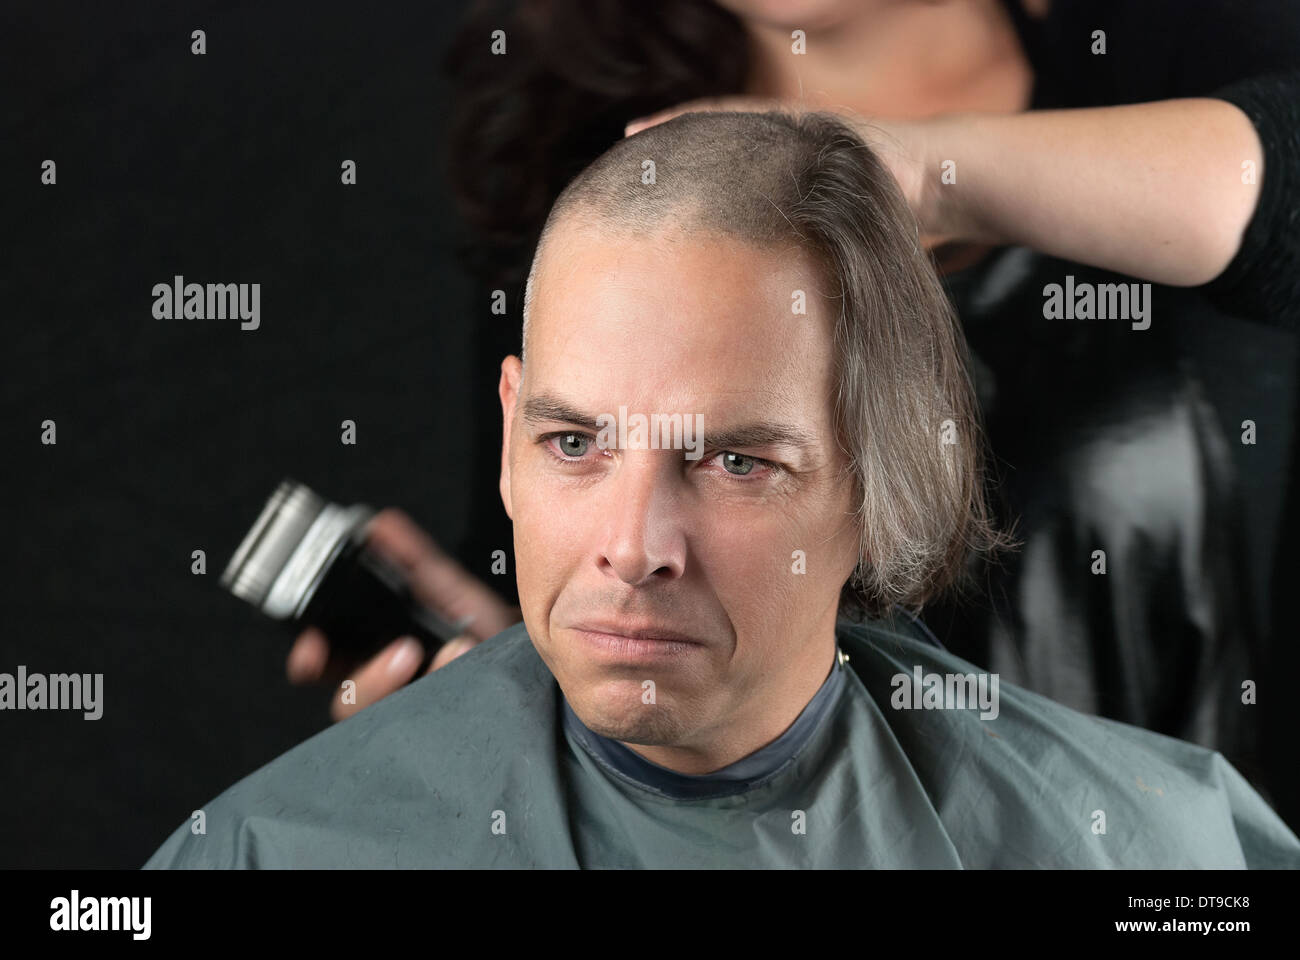 Mourning Man Getting Long Hair Shaved Off For Cancer Fundraiser Stock Photo